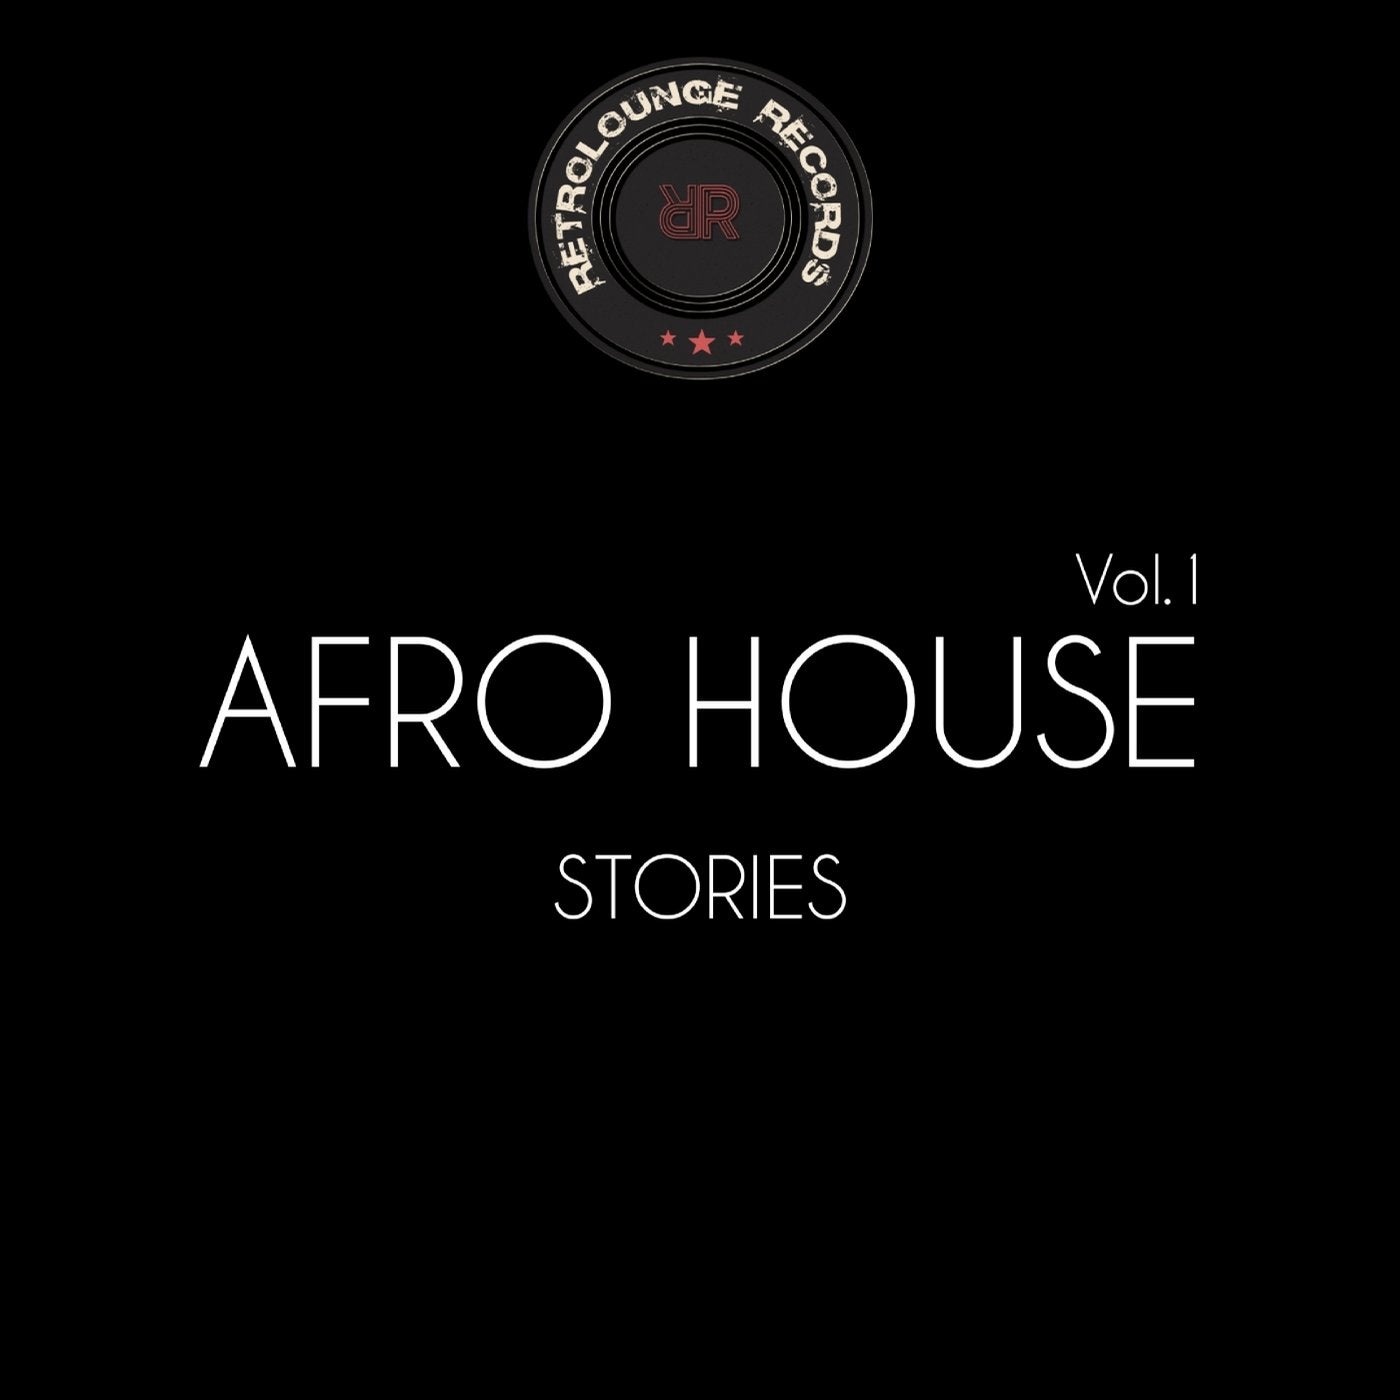 Afro House Stories, Vol. 1